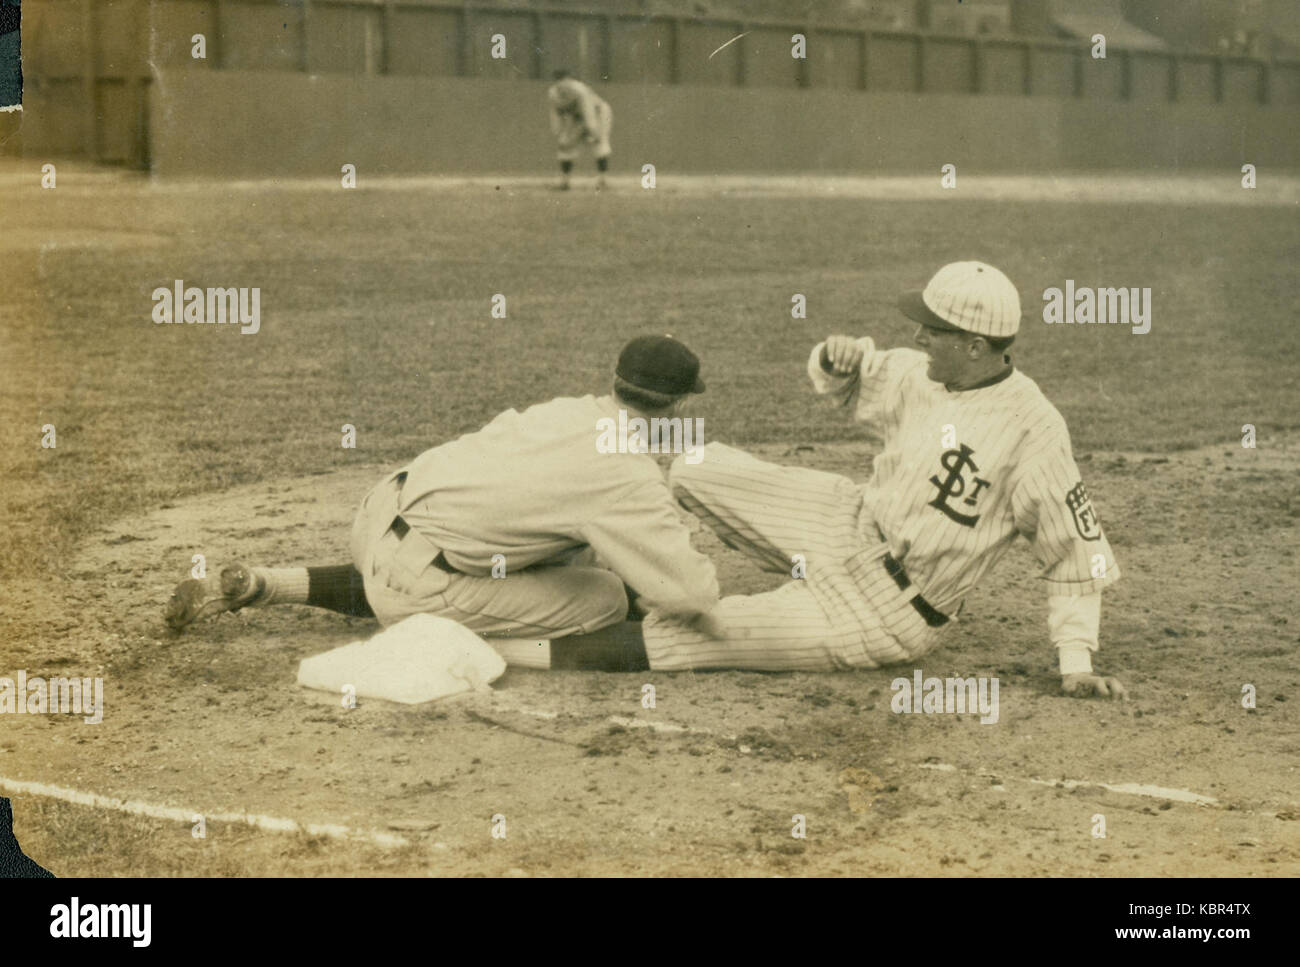 A member of the St. Louis Terriers baseball team (Federal League) slides into third base during a game Stock Photo